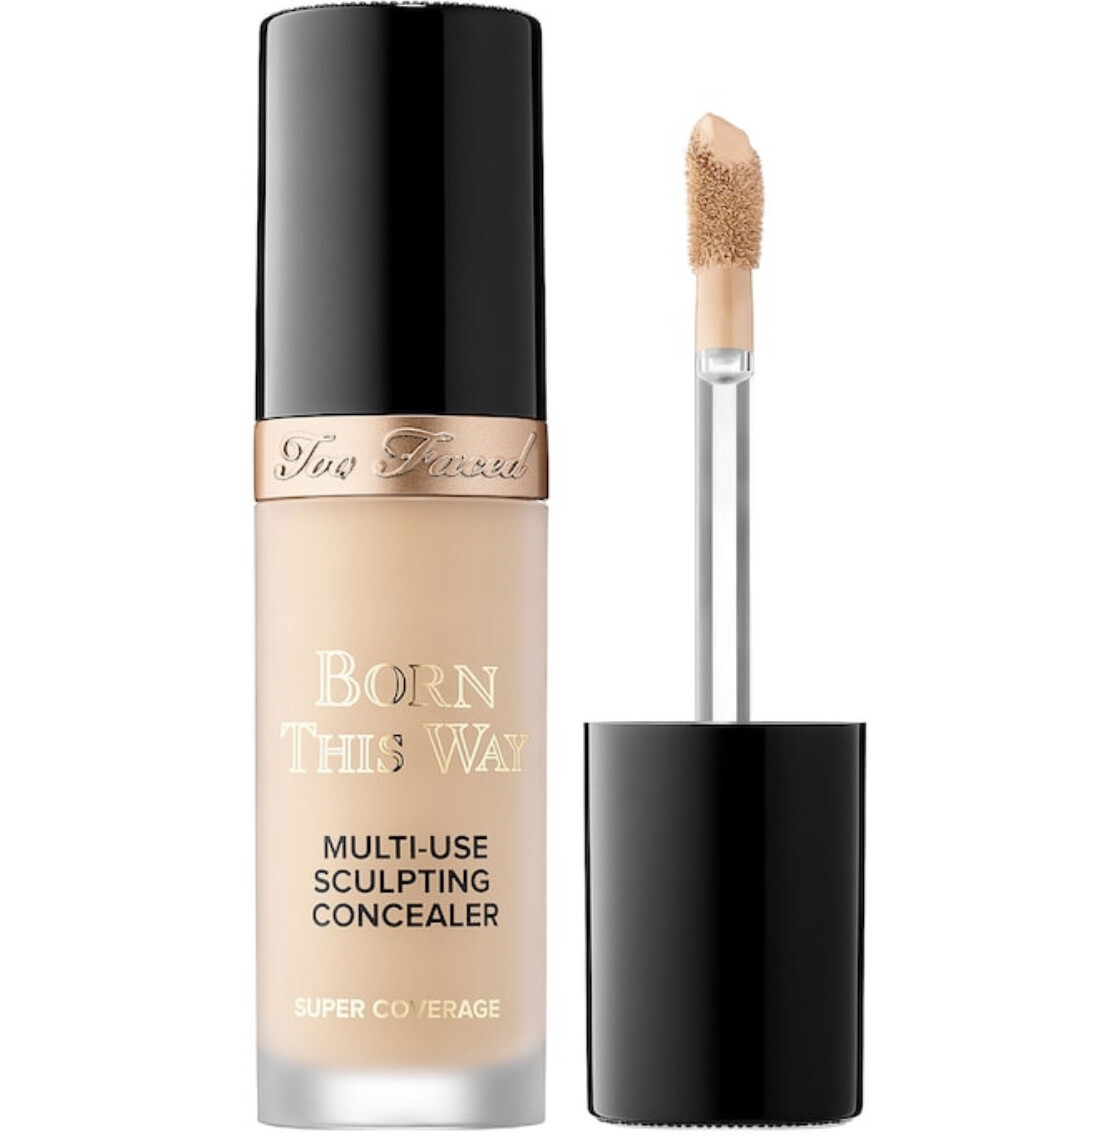 Too Faced - Born This Way Super Coverage Multi-Use Concealer | Porcelain 